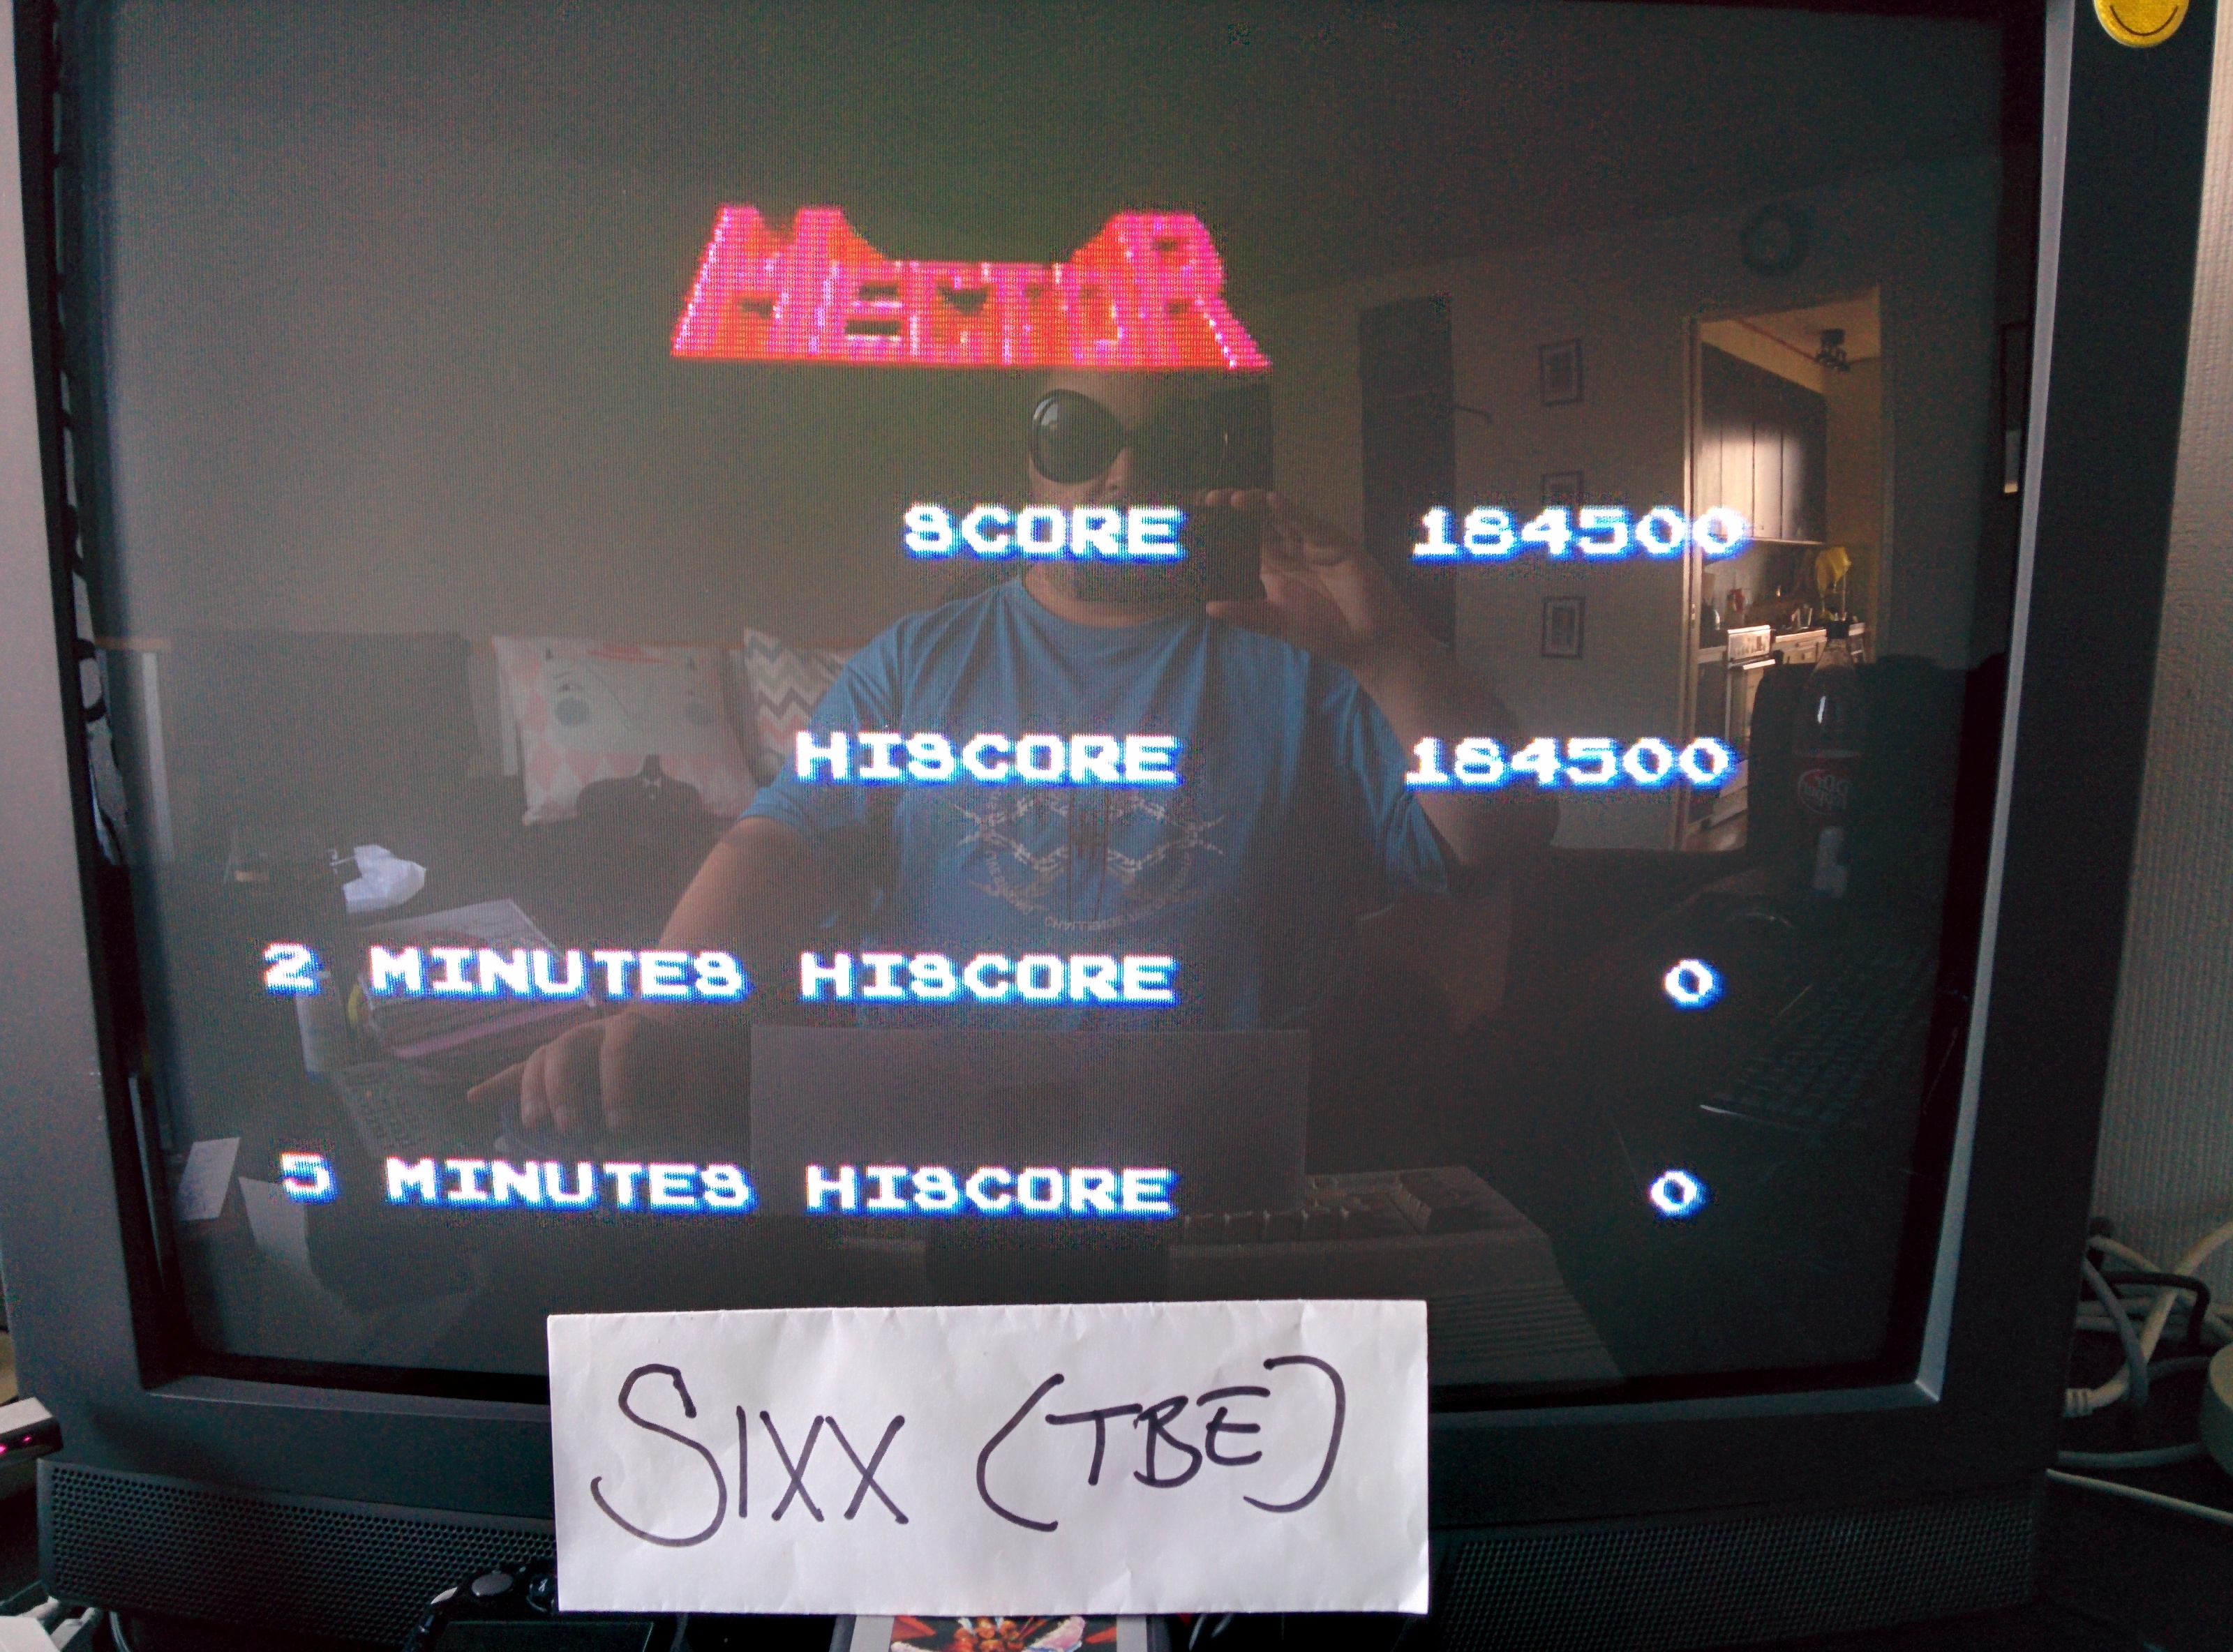 Sixx: Starship Hector [Normal] (NES/Famicom Emulated) 184,500 points on 2014-07-17 12:13:41